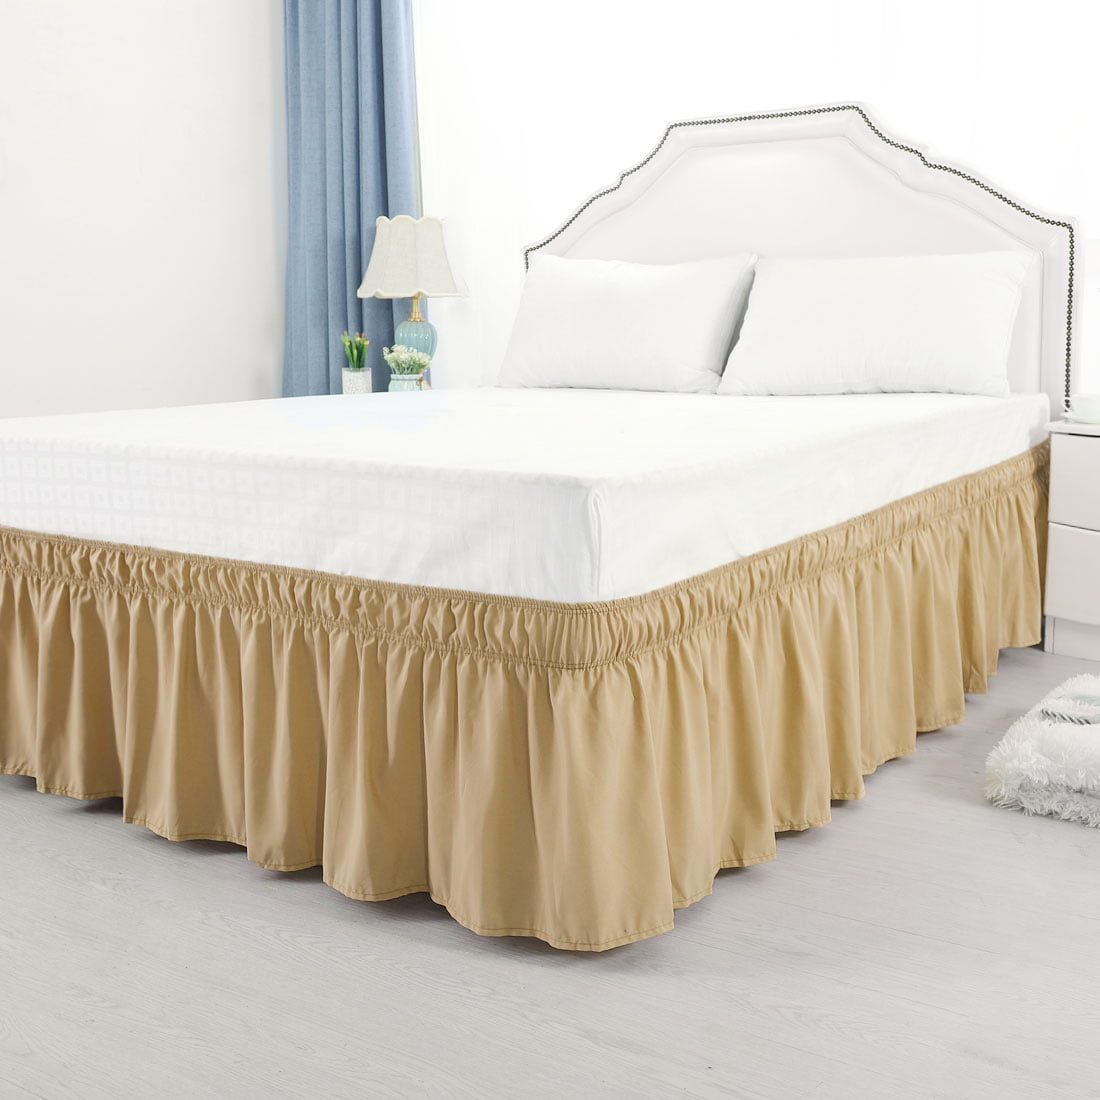 Details about   Ruffle Wrap Bed Skirt Elastic Three-layer Cake Bedding Dress Color Matching Cute 